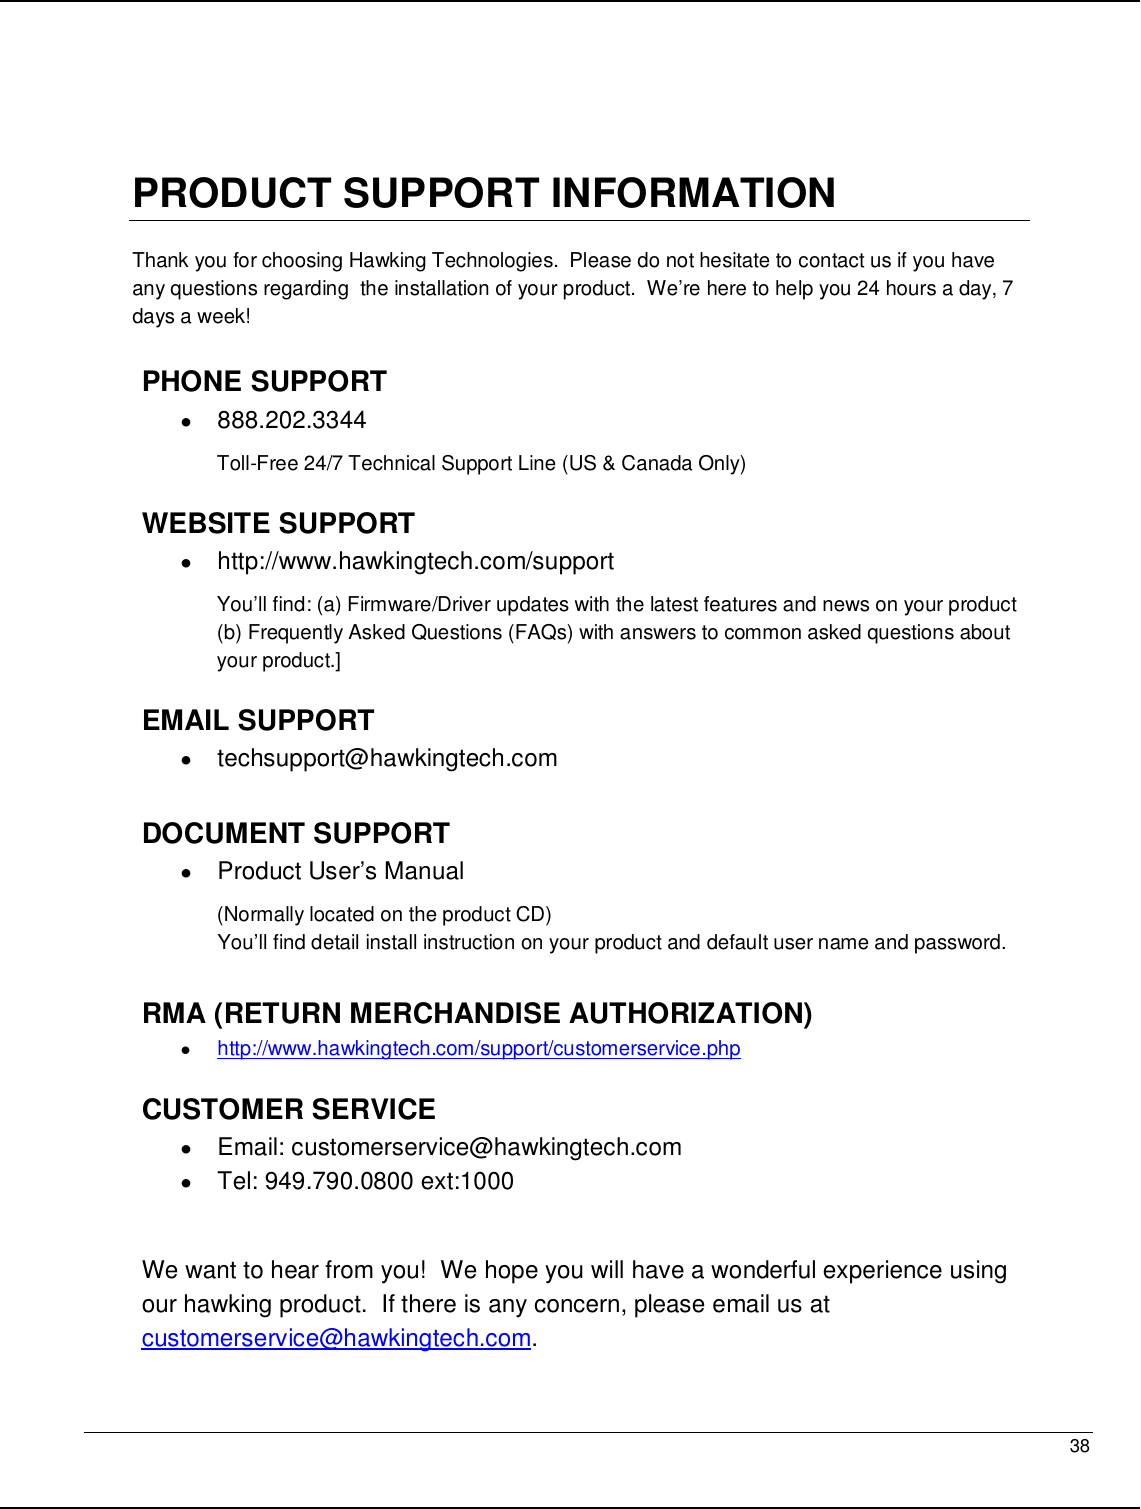   38                                                  PRODUCT SUPPORT INFORMATION  Thank you for choosing Hawking Technologies.  Please do not hesitate to contact us if you have any questions regarding  the installation of your product.  We’re here to help you 24 hours a day, 7 days a week!  PHONE SUPPORT  •  888.202.3344 Toll-Free 24/7 Technical Support Line (US &amp; Canada Only)  WEBSITE SUPPORT  •  http://www.hawkingtech.com/support You’ll find: (a) Firmware/Driver updates with the latest features and news on your product (b) Frequently Asked Questions (FAQs) with answers to common asked questions about your product.]  EMAIL SUPPORT •  techsupport@hawkingtech.com     DOCUMENT SUPPORT •  Product User’s Manual  (Normally located on the product CD) You’ll find detail install instruction on your product and default user name and password.   RMA (RETURN MERCHANDISE AUTHORIZATION) • http://www.hawkingtech.com/support/customerservice.php  CUSTOMER SERVICE •  Email: customerservice@hawkingtech.com •  Tel: 949.790.0800 ext:1000   We want to hear from you!  We hope you will have a wonderful experience using our hawking product.  If there is any concern, please email us at customerservice@hawkingtech.com.  